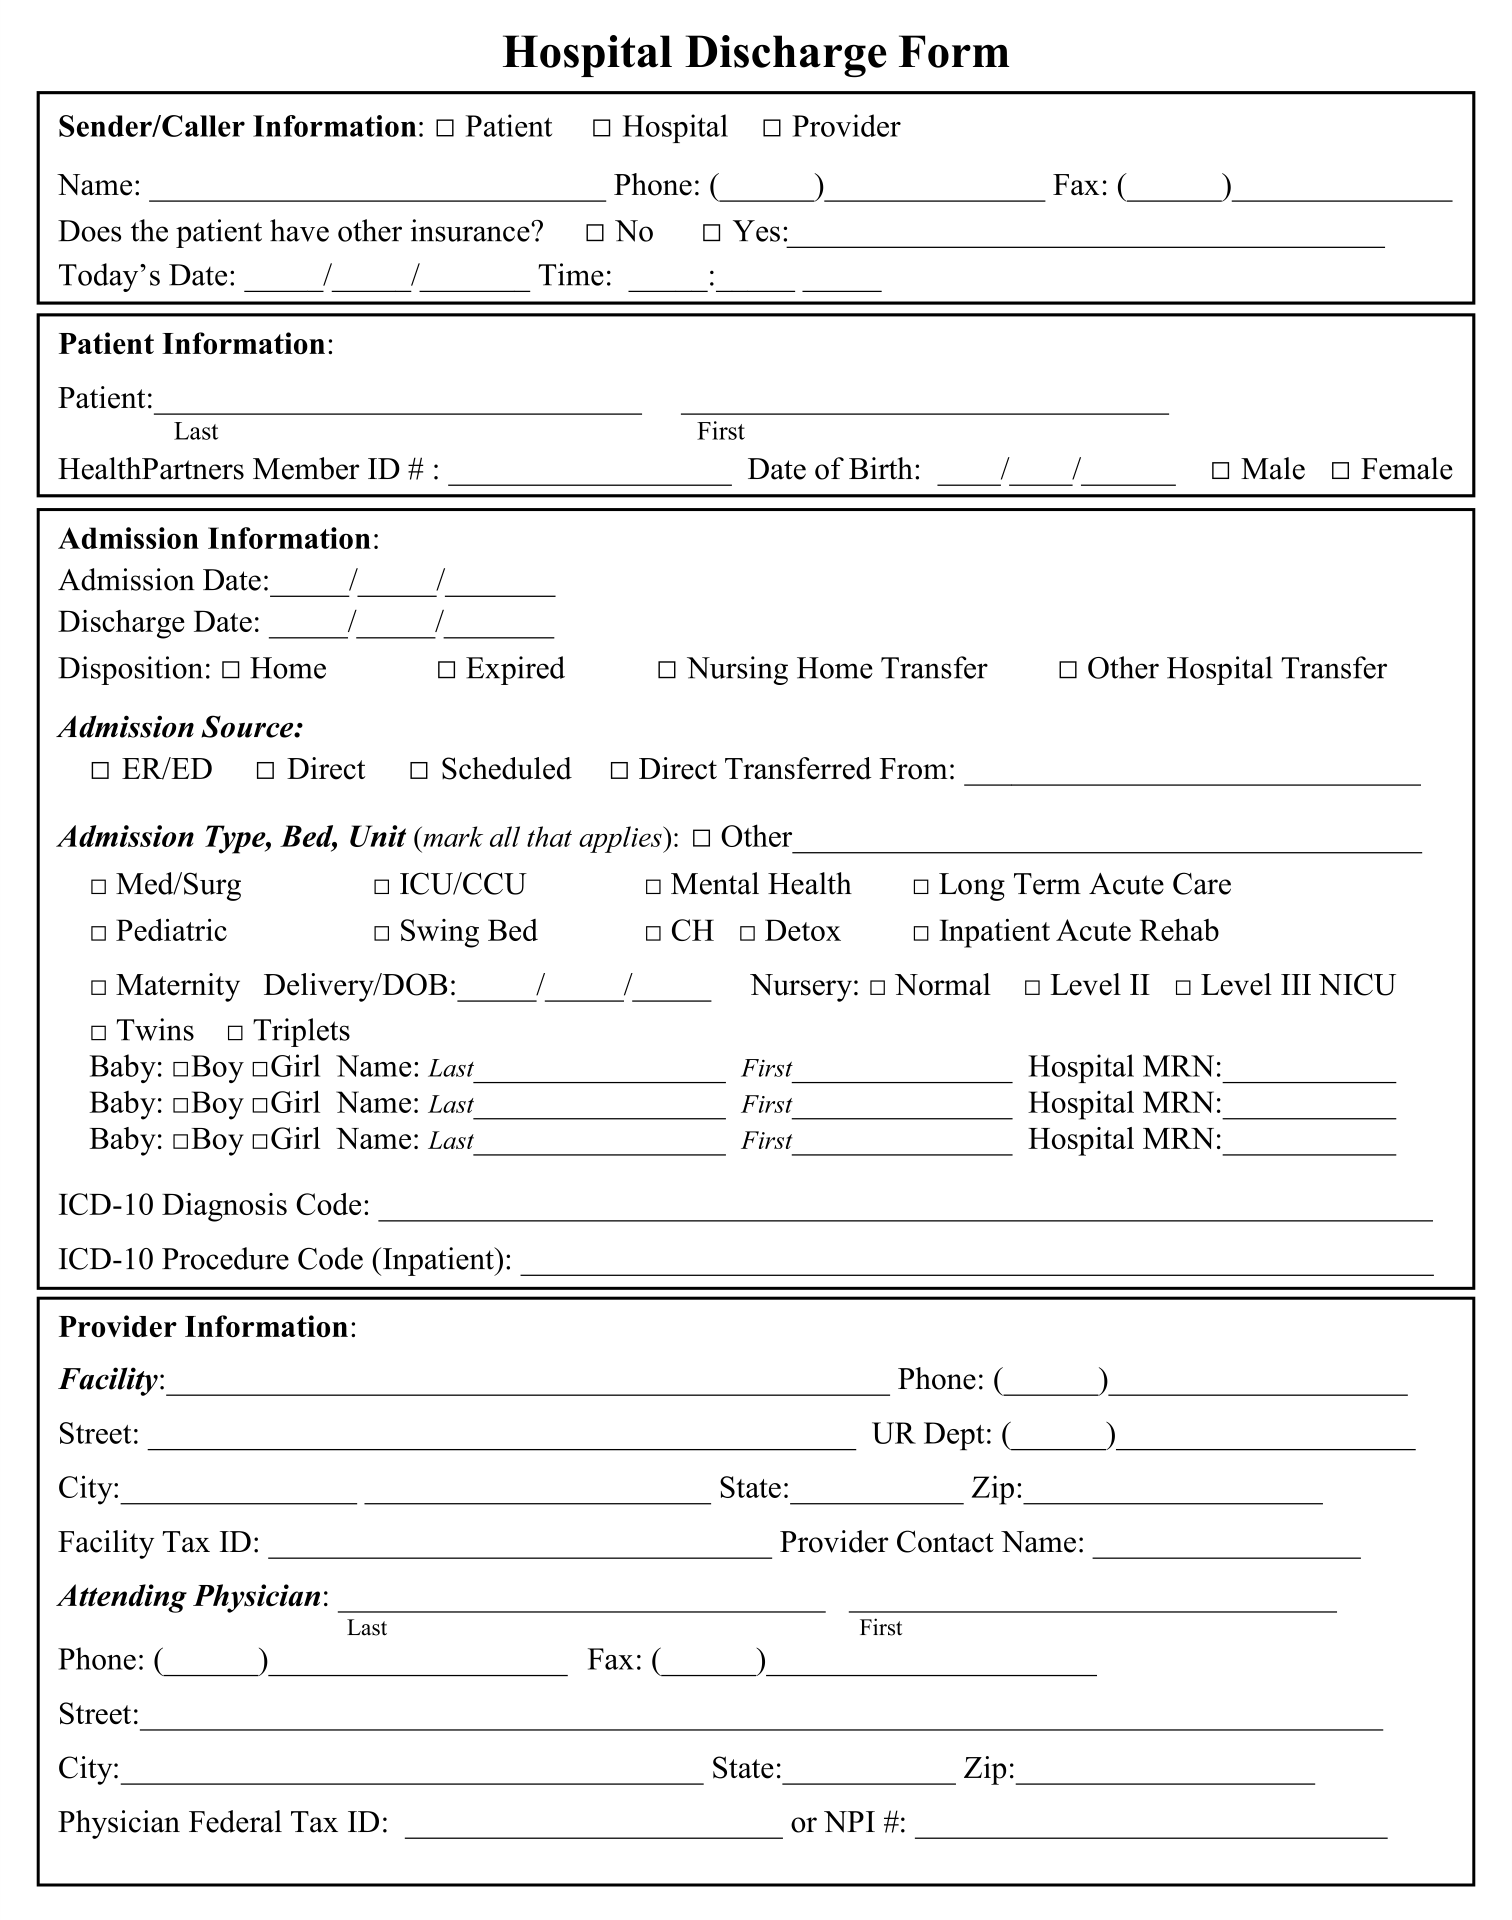 Free Printable Hospital Discharge Forms_18632